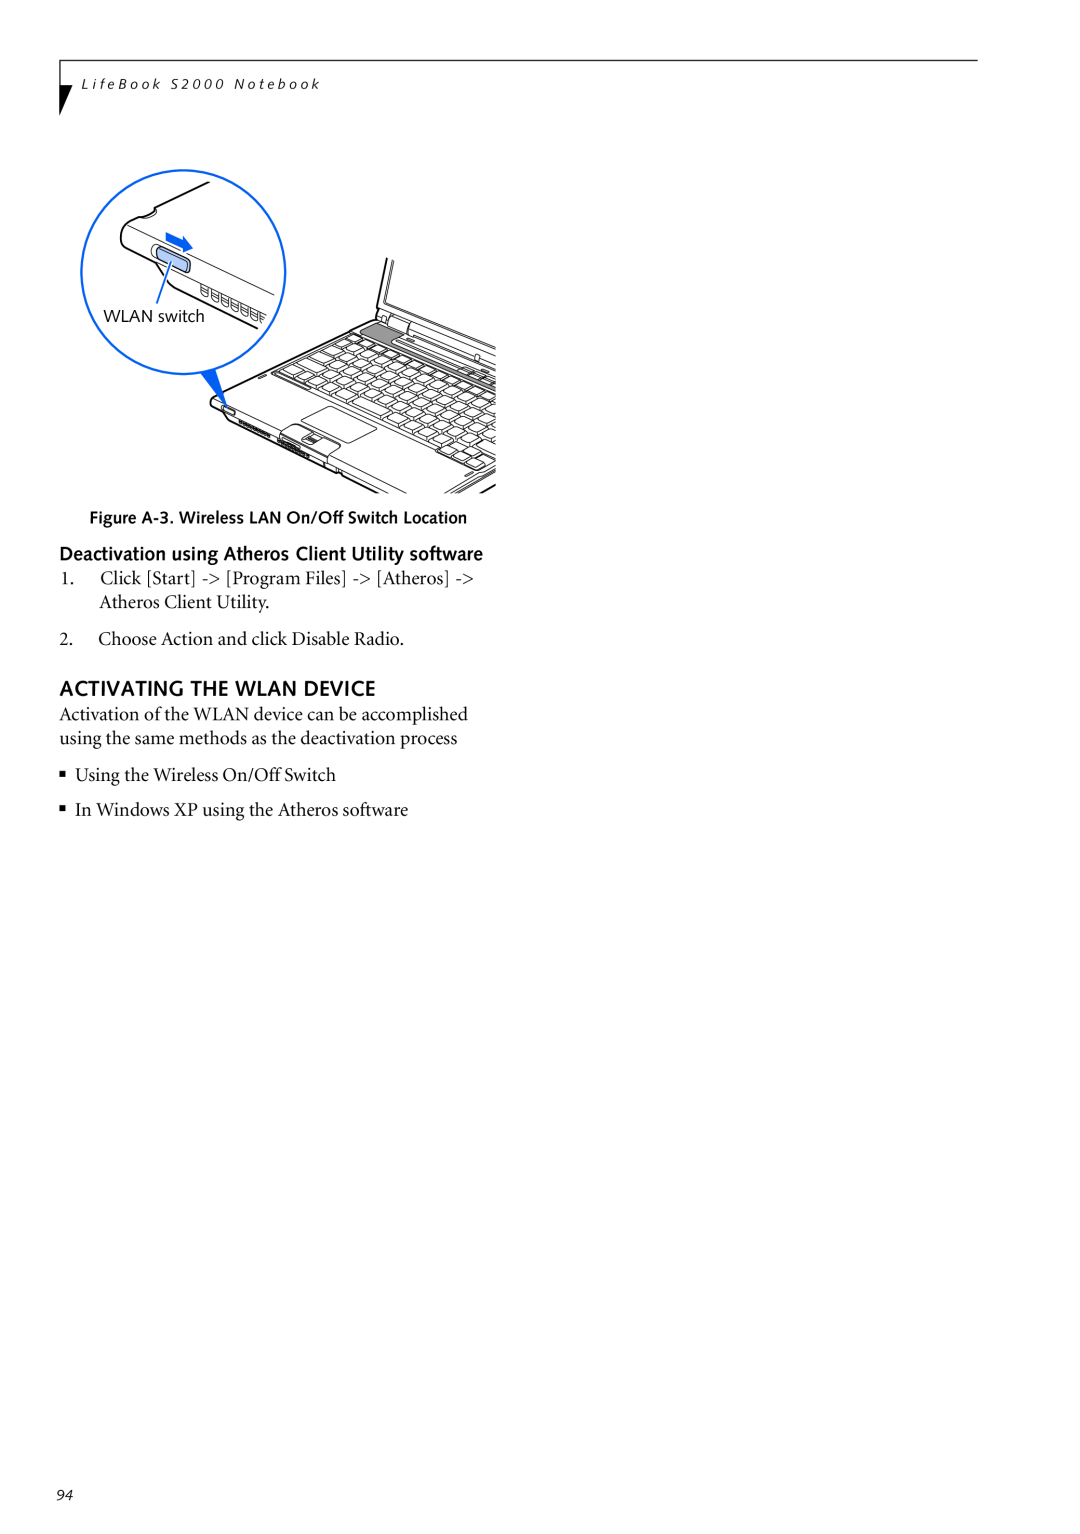 Fujitsu Siemens Computers S2210 manual Activating The Wlan Device, Deactivation using Atheros Client Utility software 